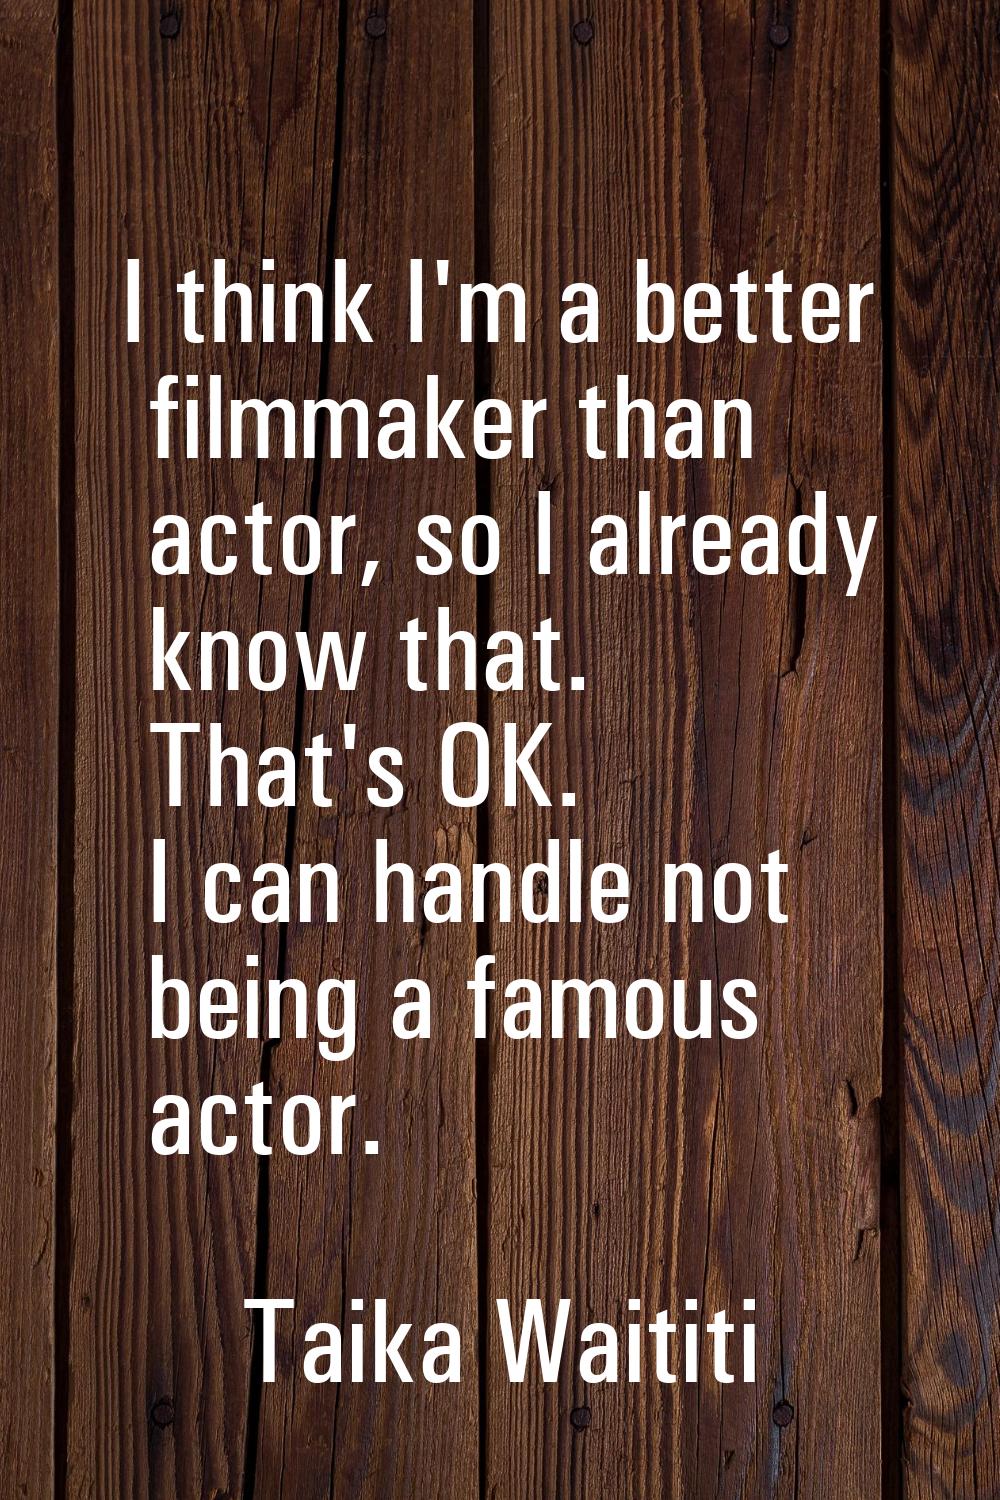 I think I'm a better filmmaker than actor, so I already know that. That's OK. I can handle not bein